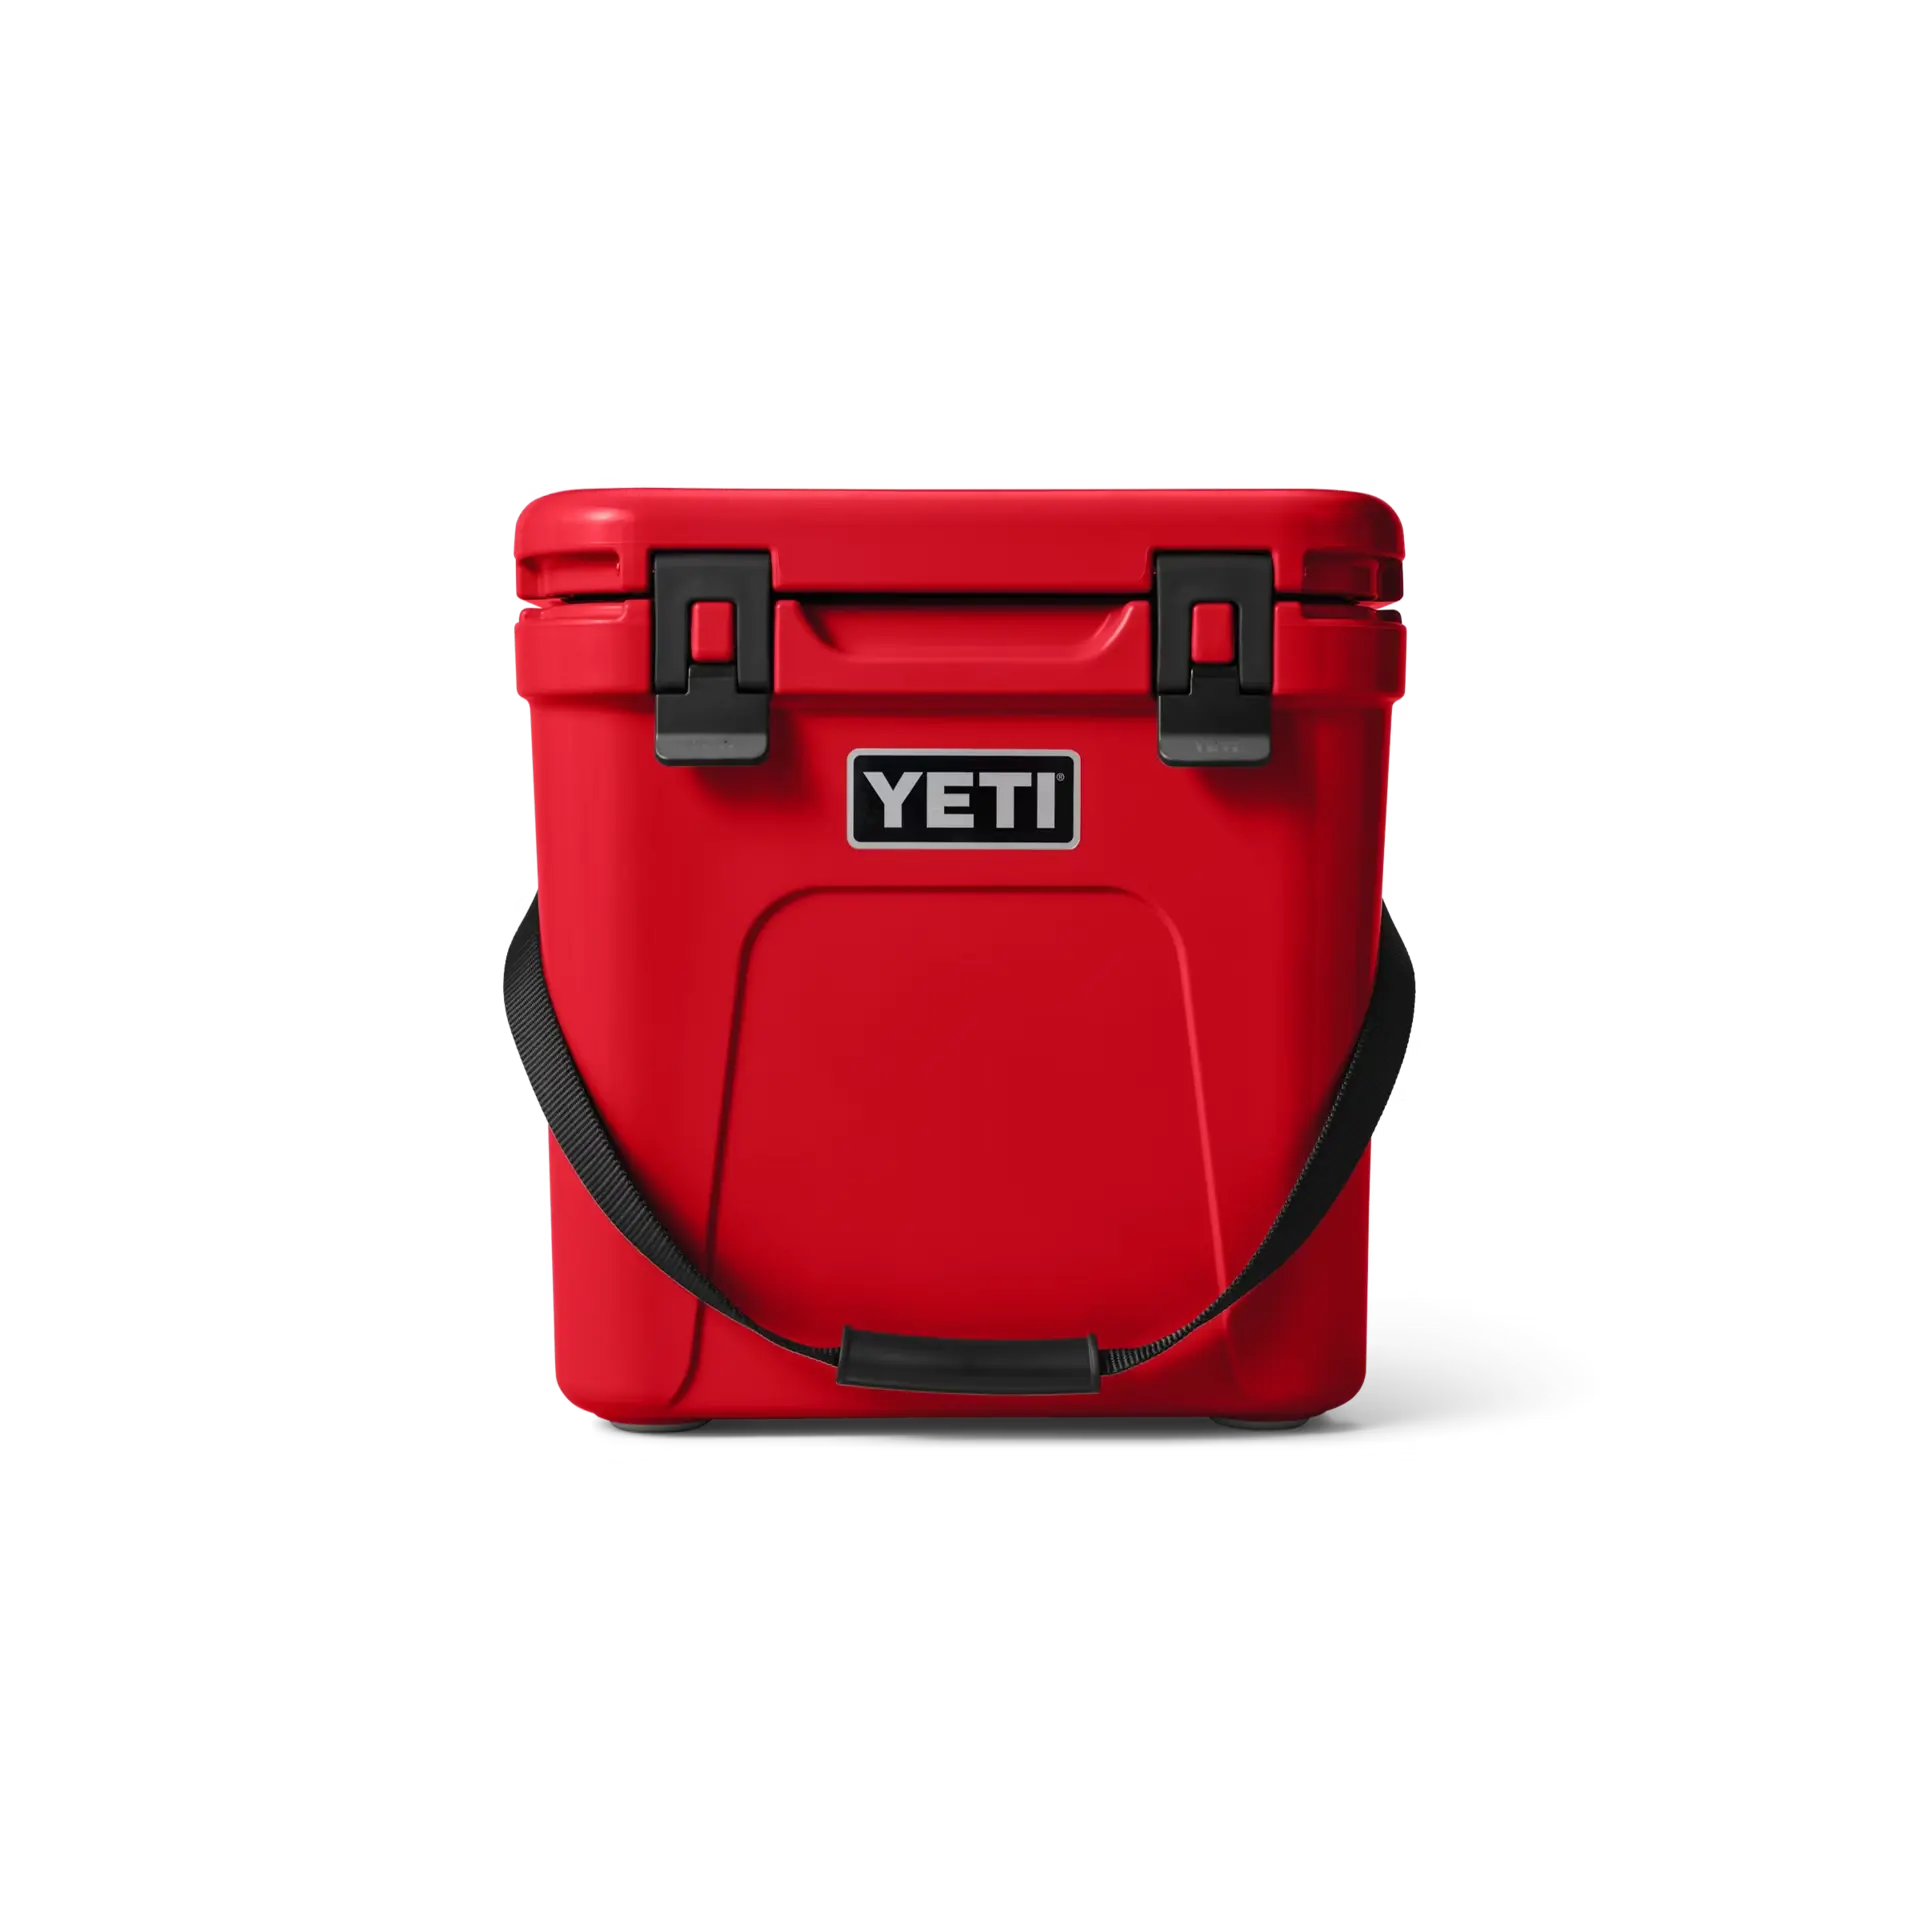 YETI Roadie 24 Coolers Rescue Red 12042538